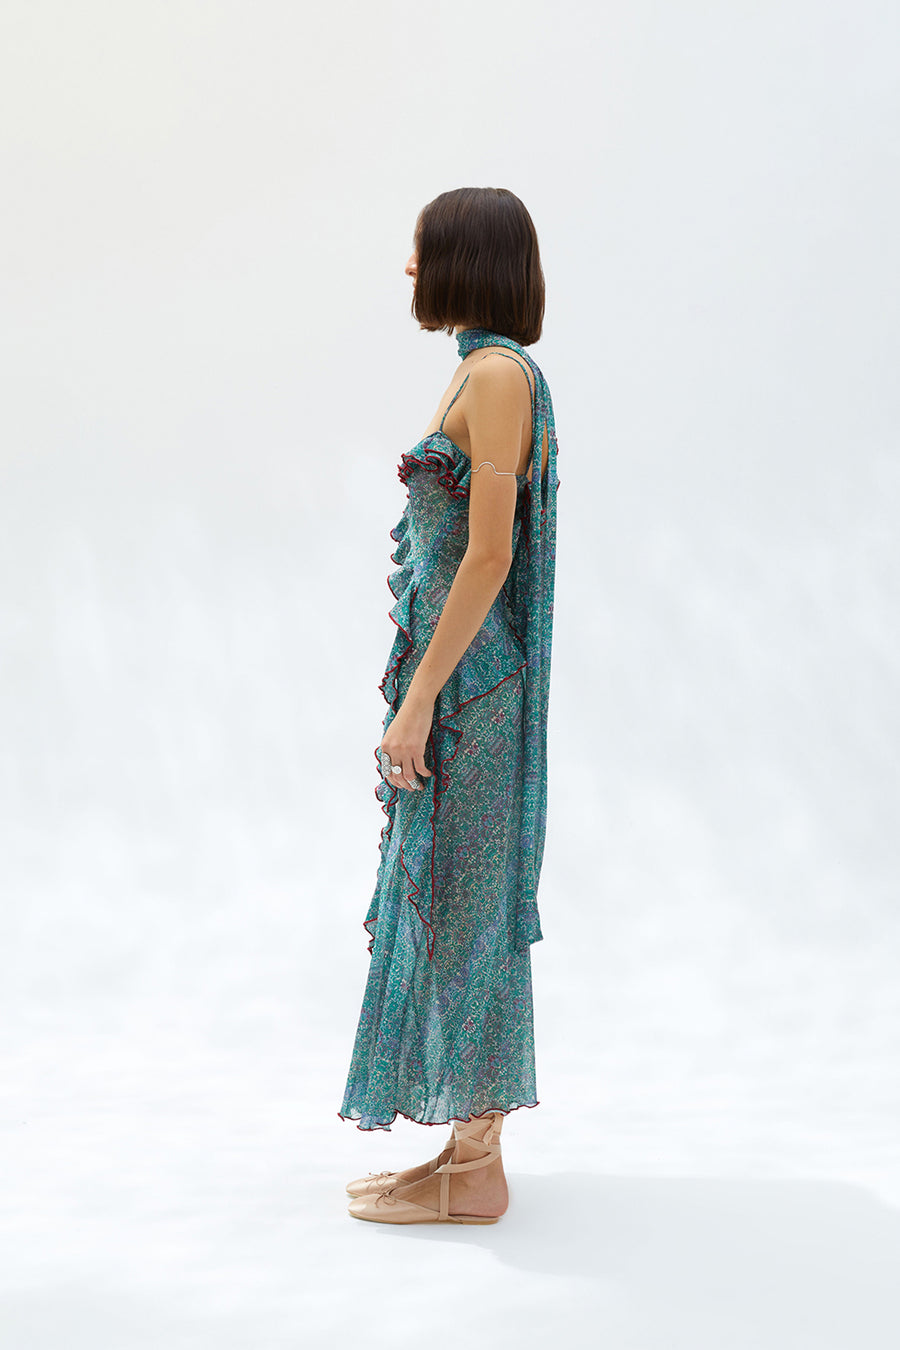 MONICA - Scarf and ruffle detailed maxi dress with contrast stitching